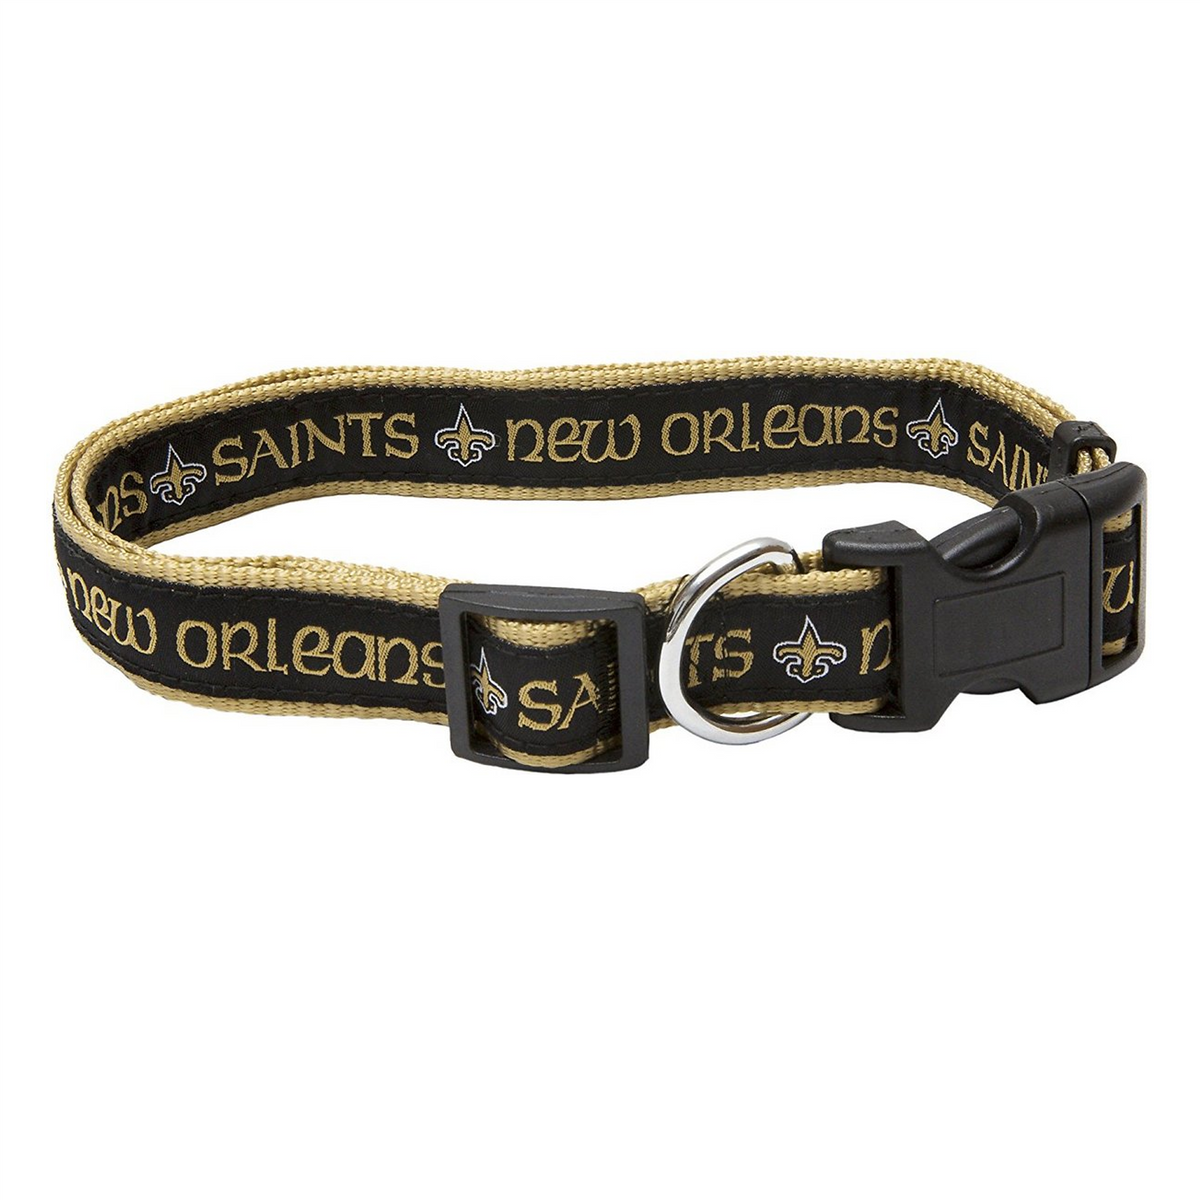 New Orleans Saints Dog Collar or Leash - 3 Red Rovers